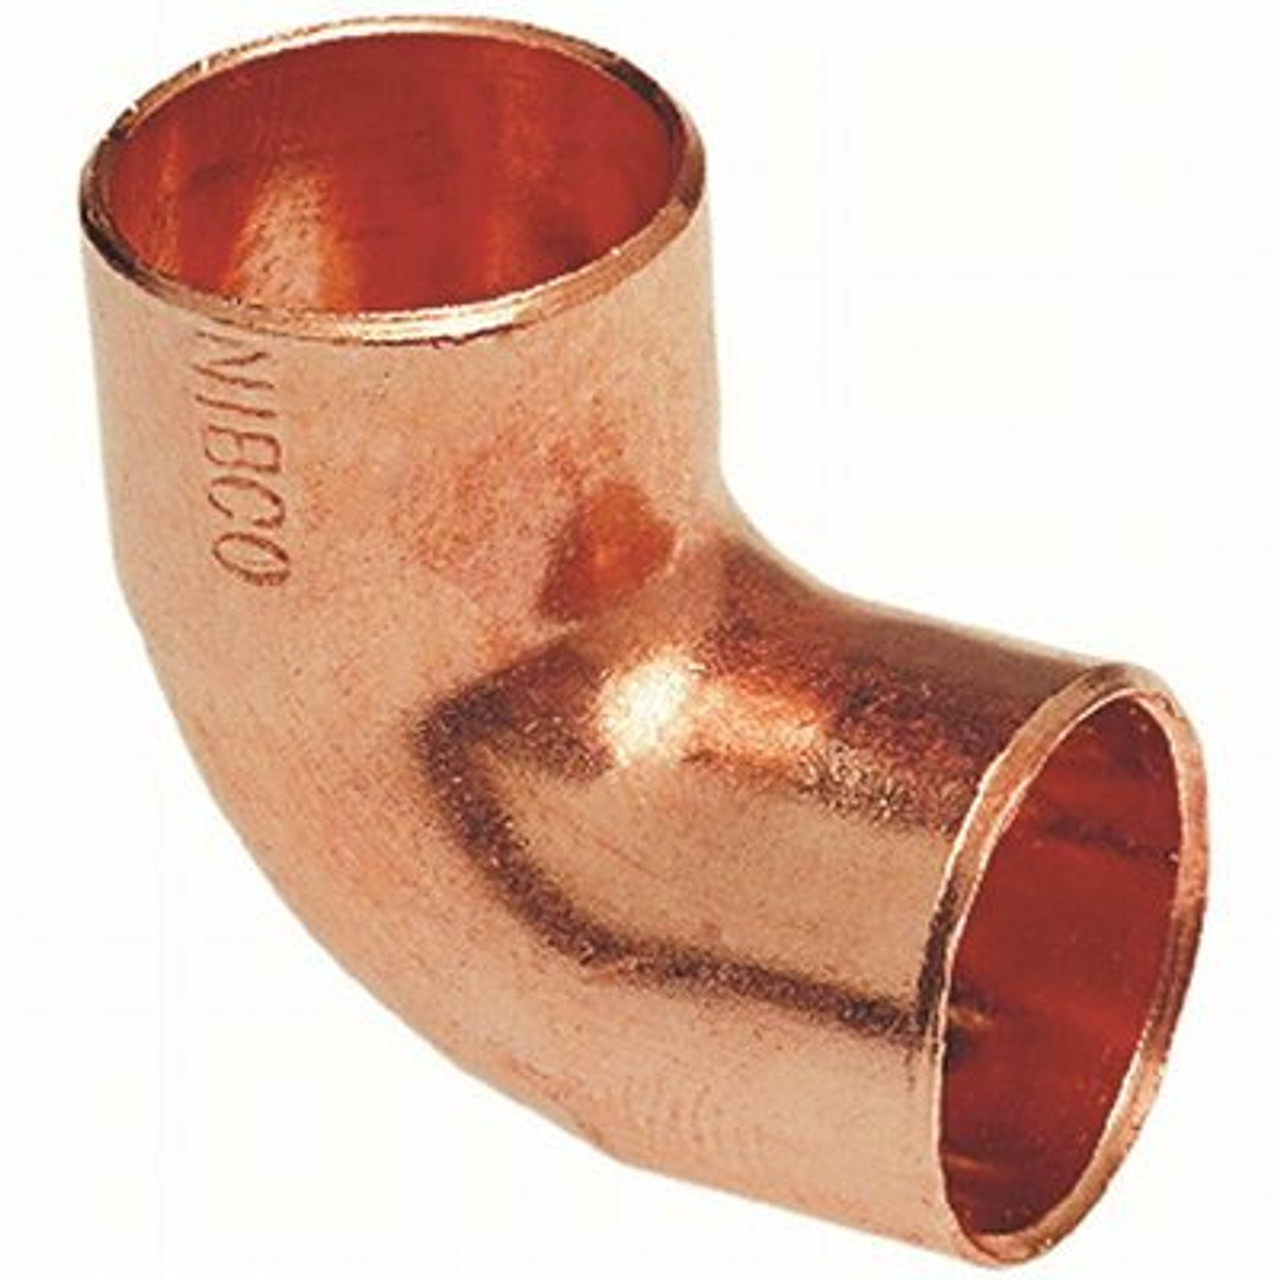 Nibco 1/2 In. Wrot Copper 90-Degree Cup X Cup Elbow Fitting Pro Pack (50-Pack)